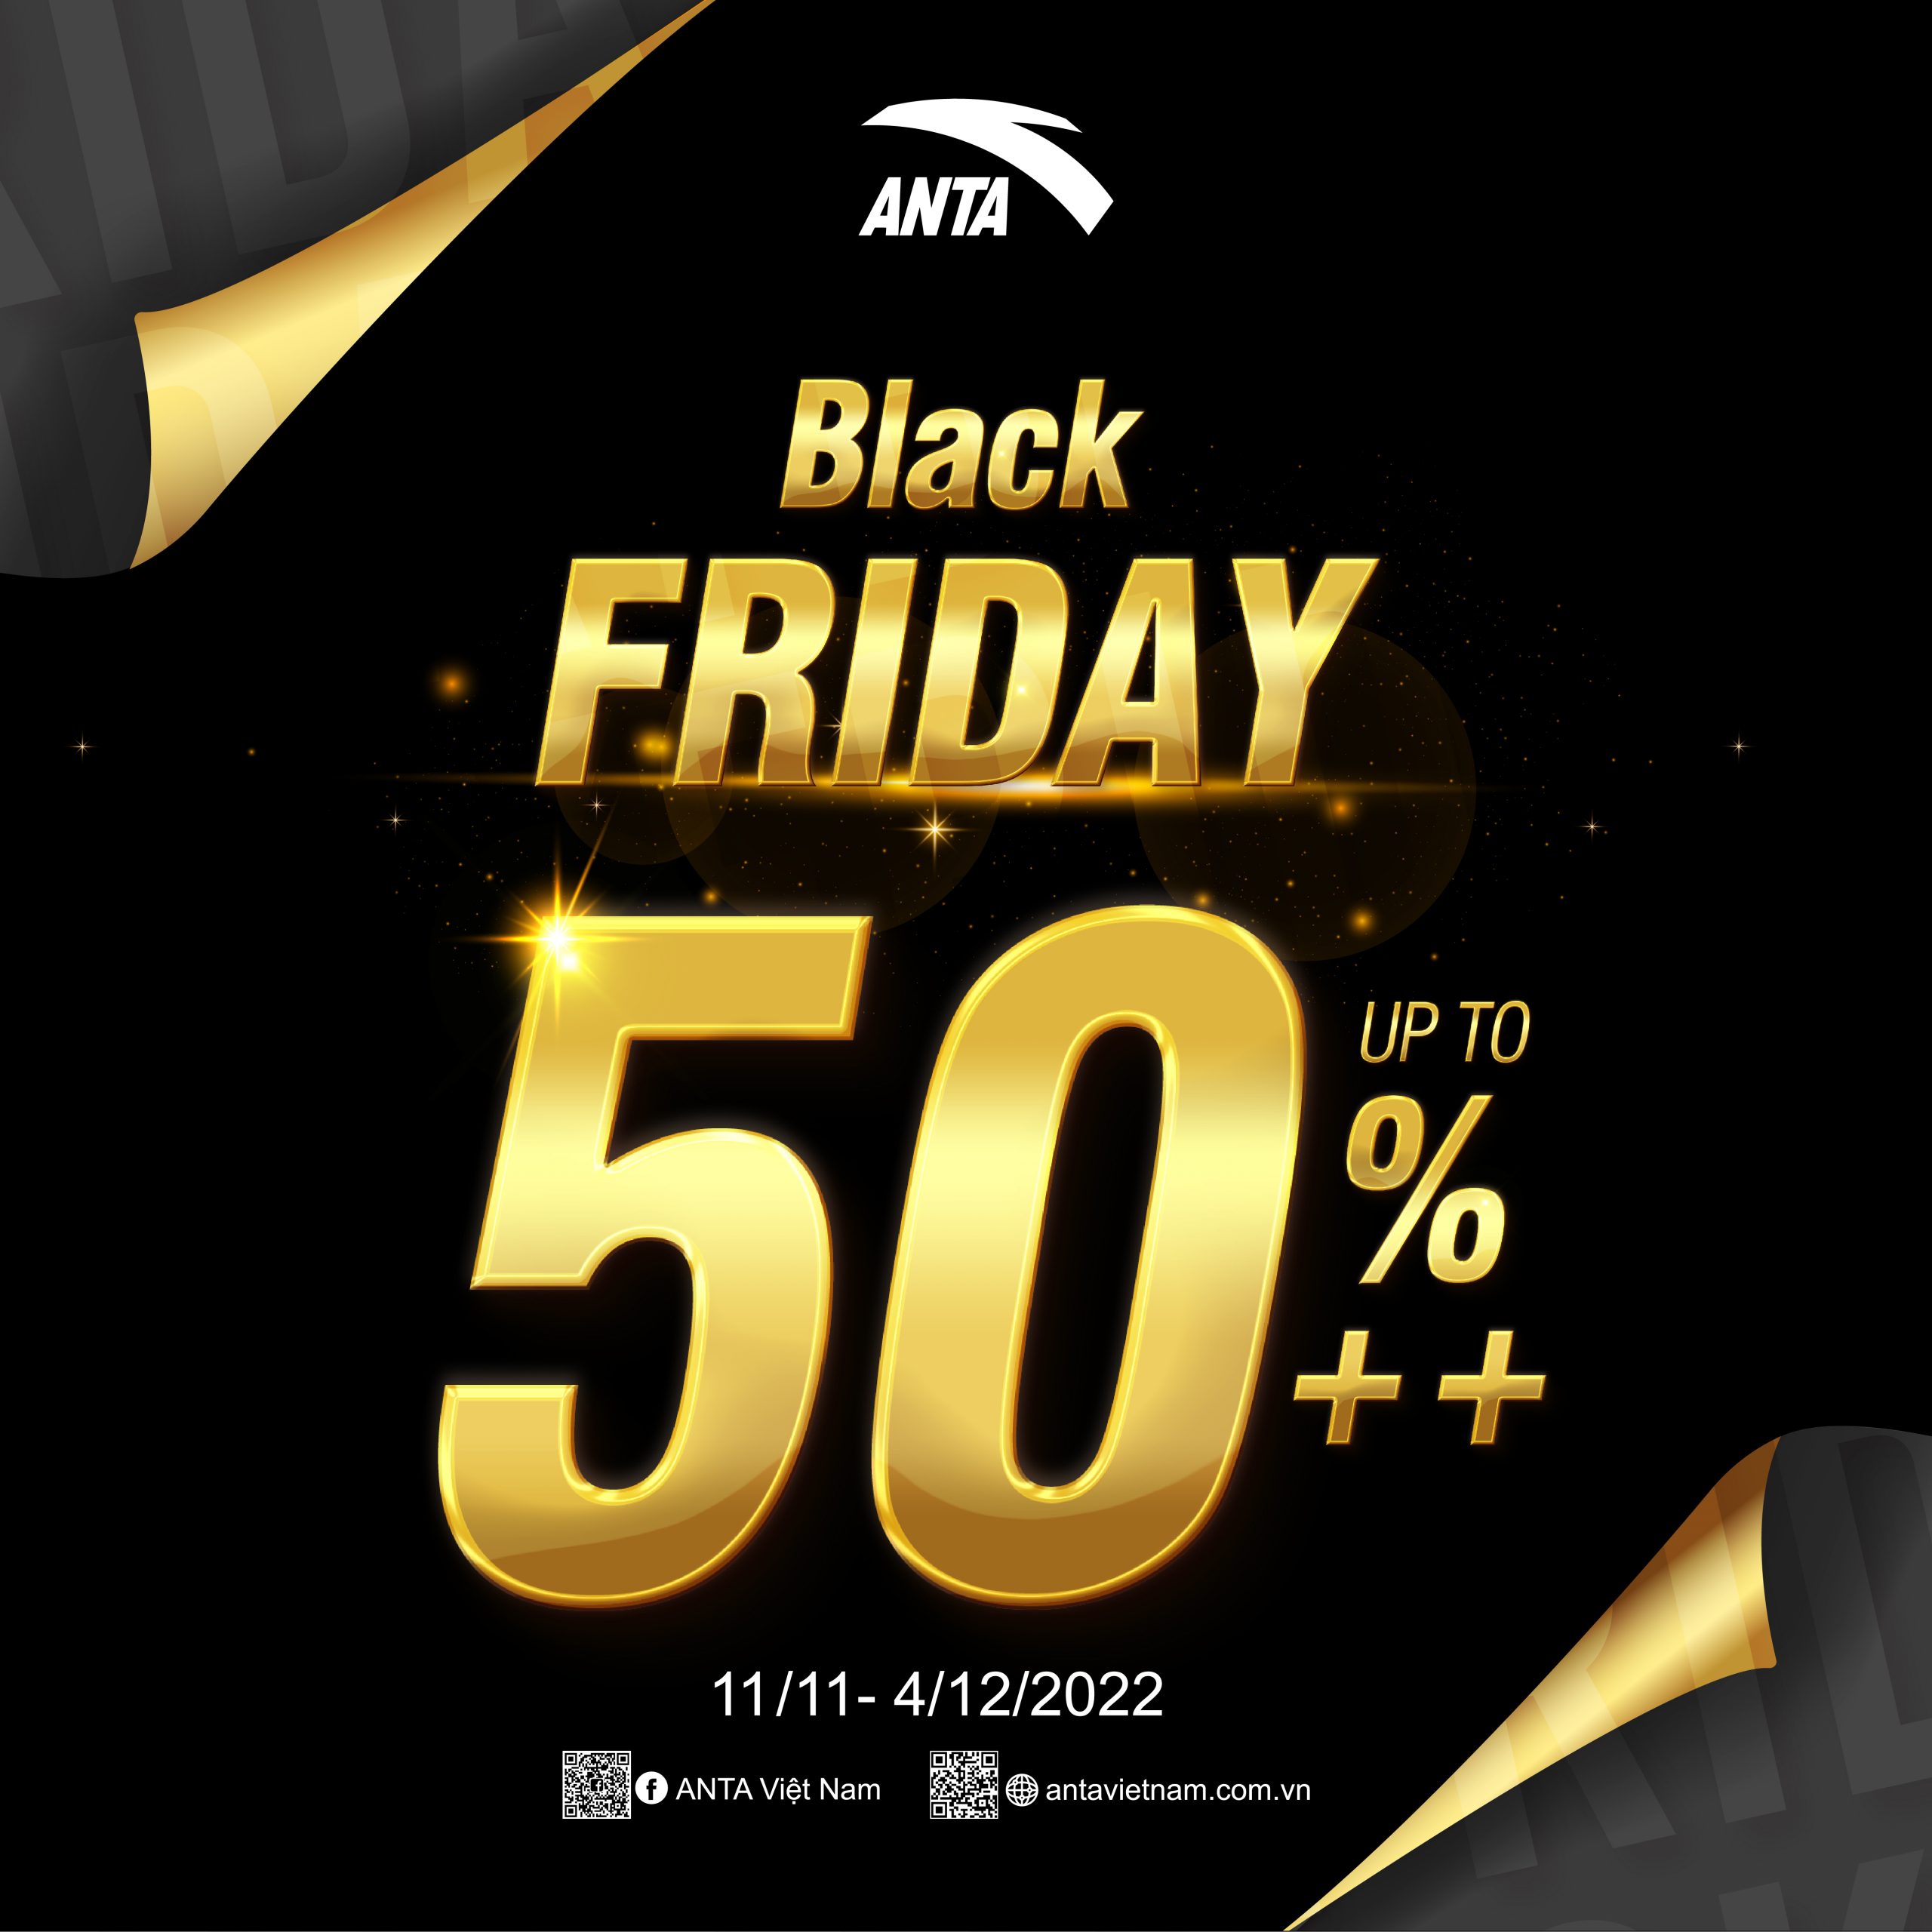 ANTA - BLACK FRIDAY | SALE UP TO 50%++ - AEONMALL Bình Dương Canary - What Is The Teacher Pay Teacher Black Friday Sale